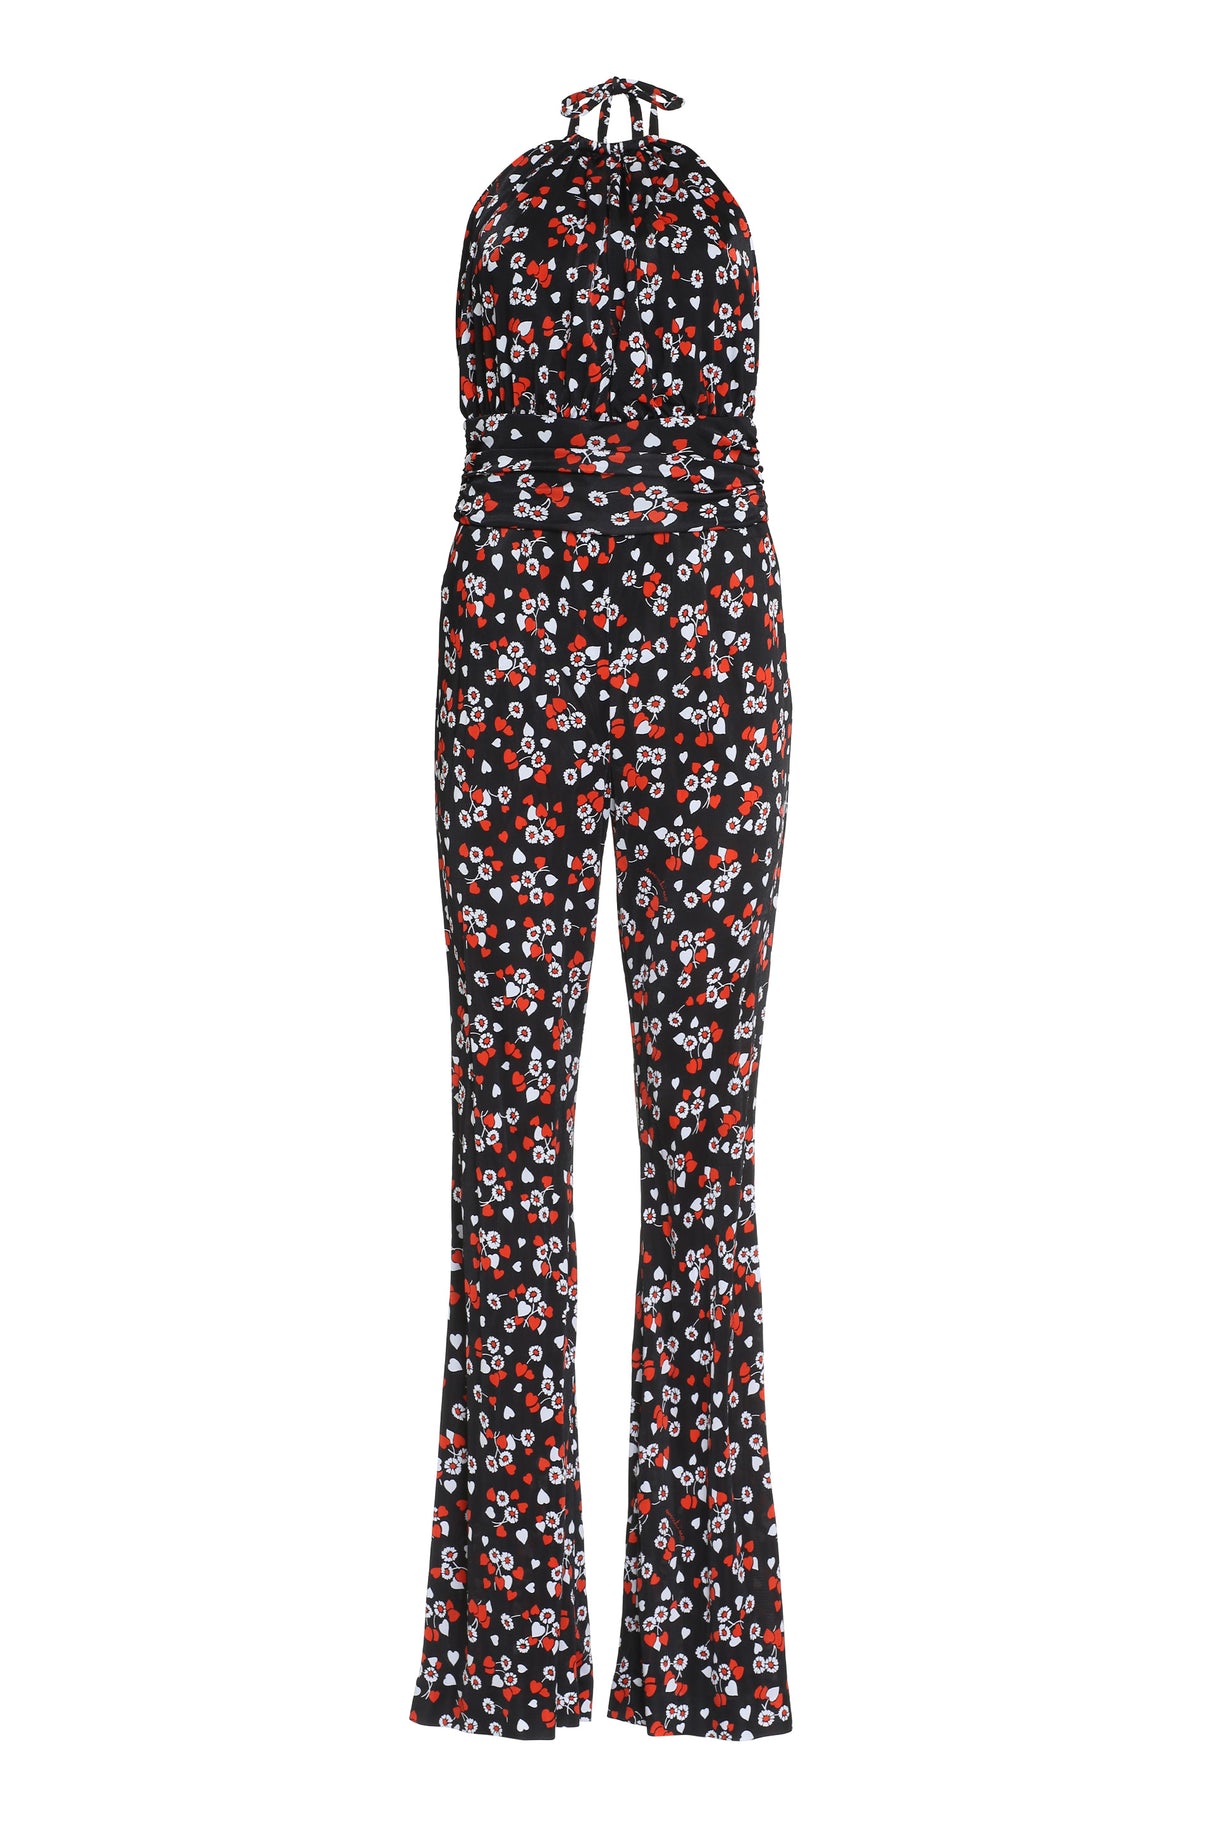 MOSCHINO COUTURE Black All Over Print Halterneck Jumpsuit for Women - SS23 Collection